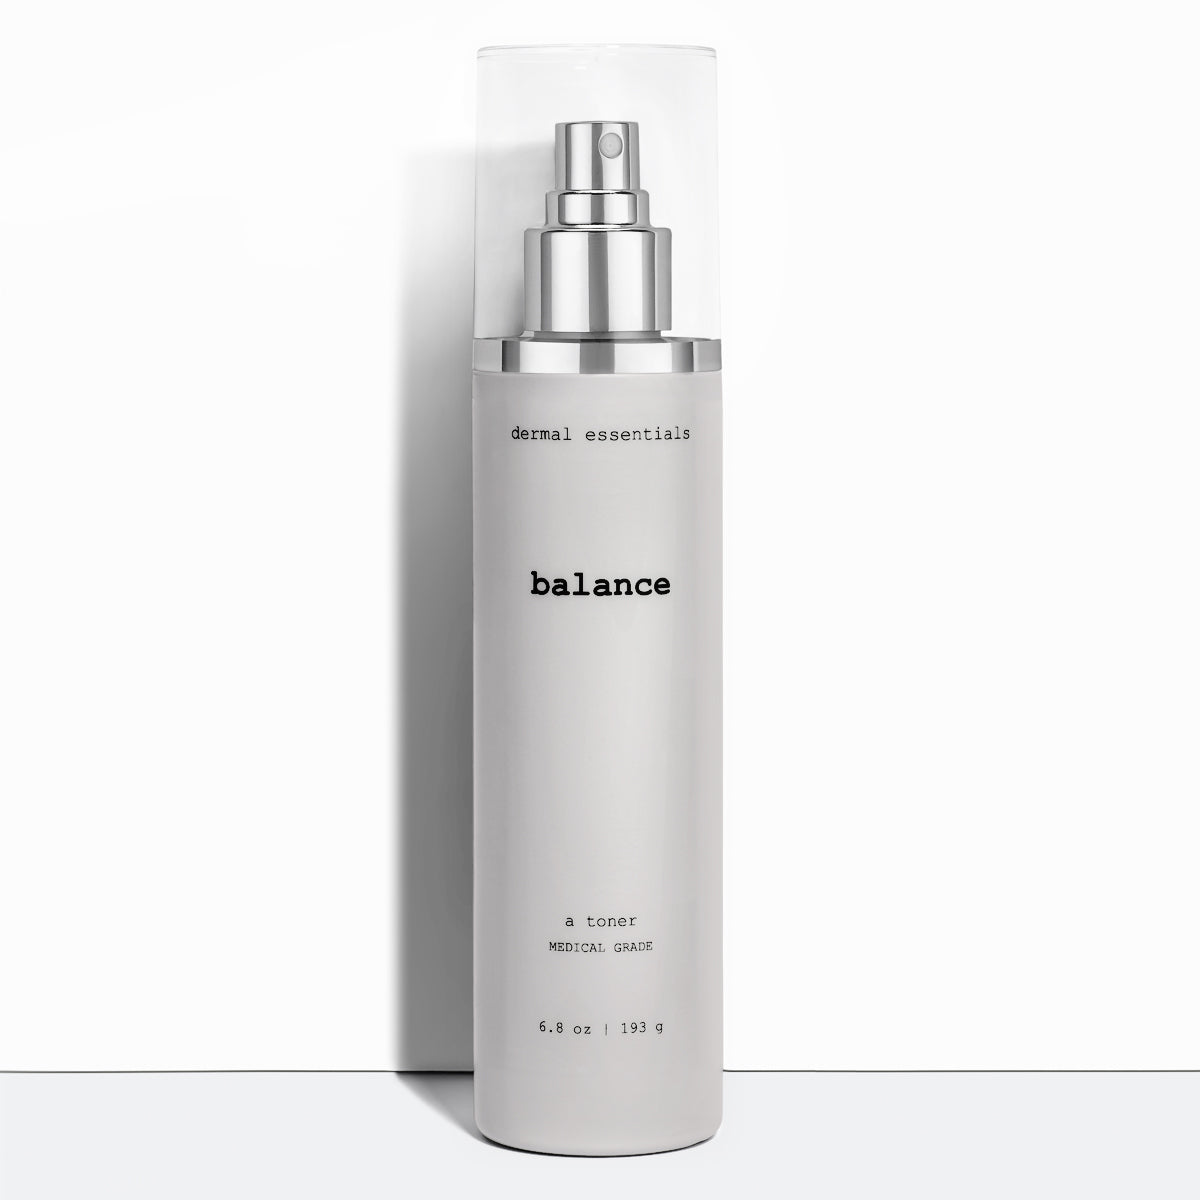 Full size 6.8 oz. Silver cylinder plastic bottle silver pump spray clear plastic cap. Balance is a gentle hydrating peptide facial toner Dermal Essentials Medical Grade Skincare . A mini size is 5 ml of this  facial toner skincare product  in a white plastic pump bottle with black letters and clear lid.